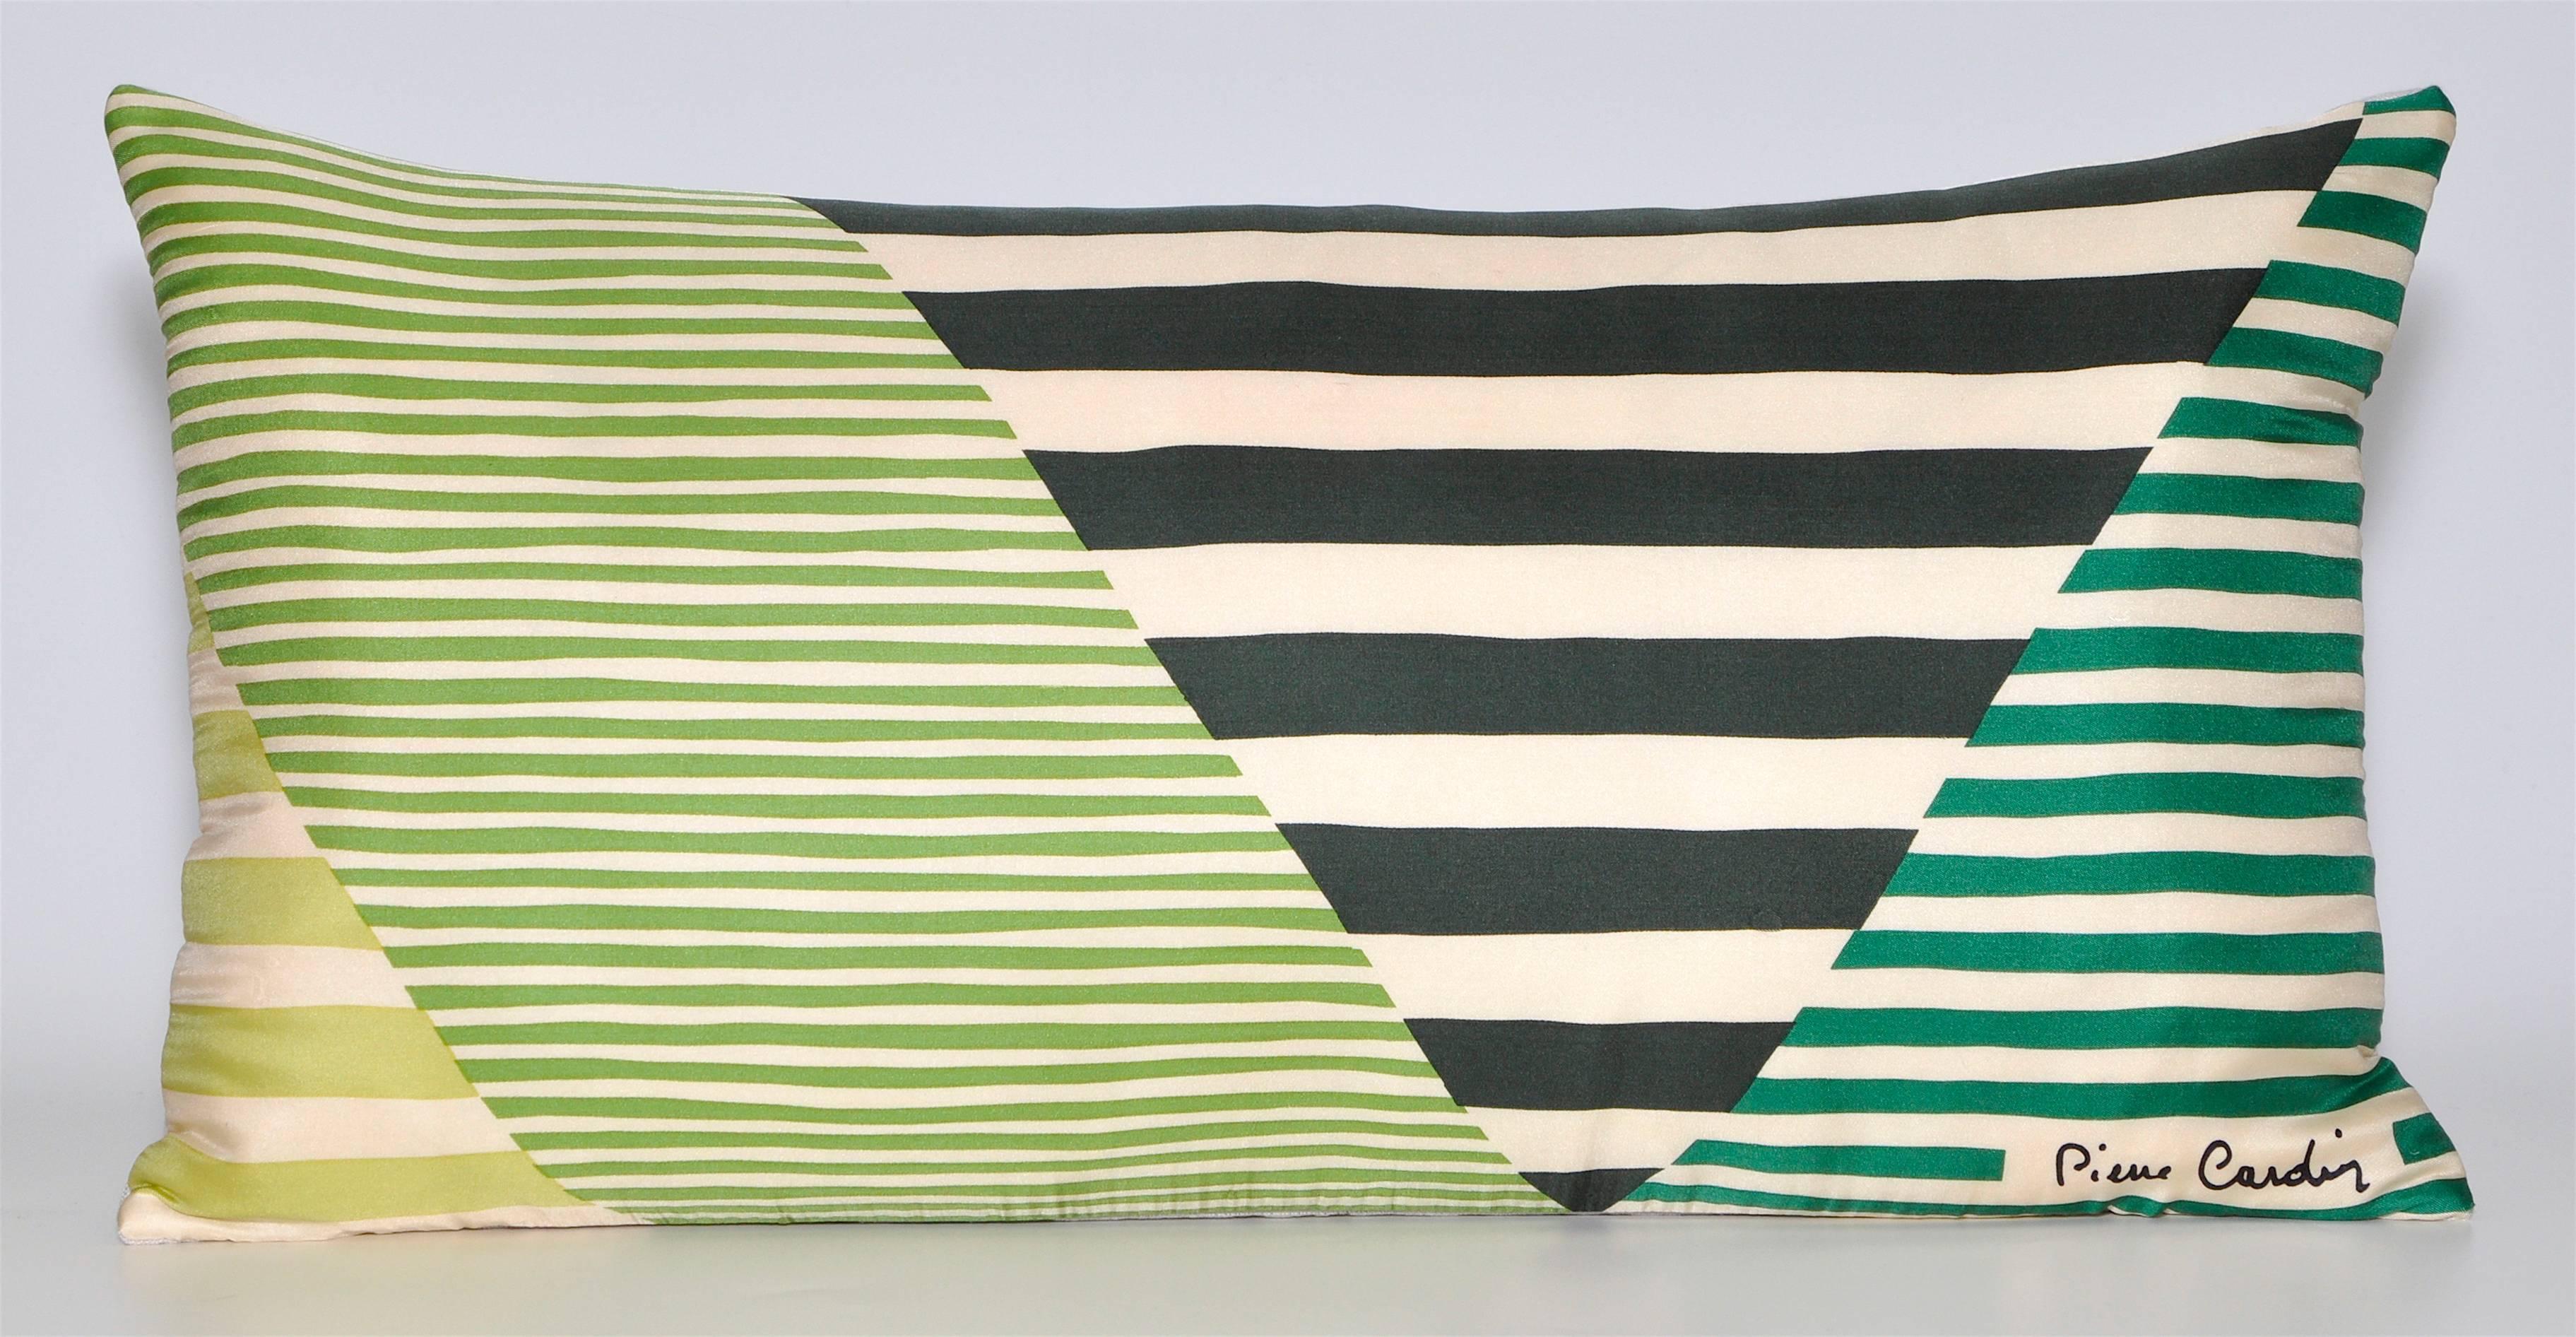 Custom-made one-of-a-kind set of luxury cushions (pillows) created from an exquisite vintage silk Pierre Cardin fashion scarf in an attractive geometric pattern. With bold stripes alternating in beige and an array of greens. From a very delicate